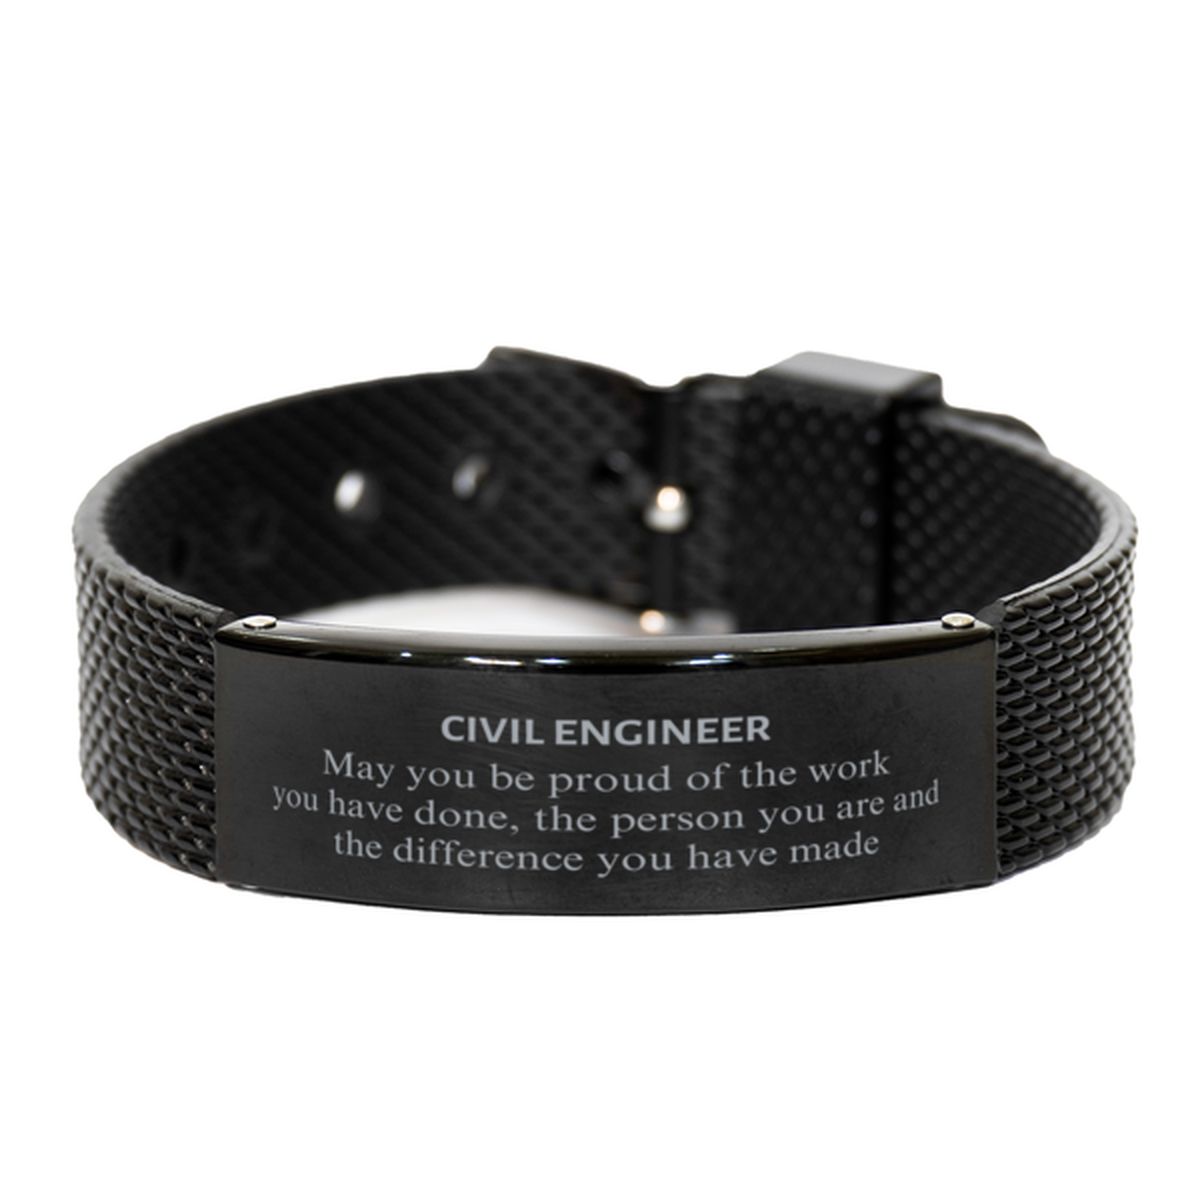 Civil Engineer May you be proud of the work you have done, Retirement Civil Engineer Black Shark Mesh Bracelet for Colleague Appreciation Gifts Amazing for Civil Engineer